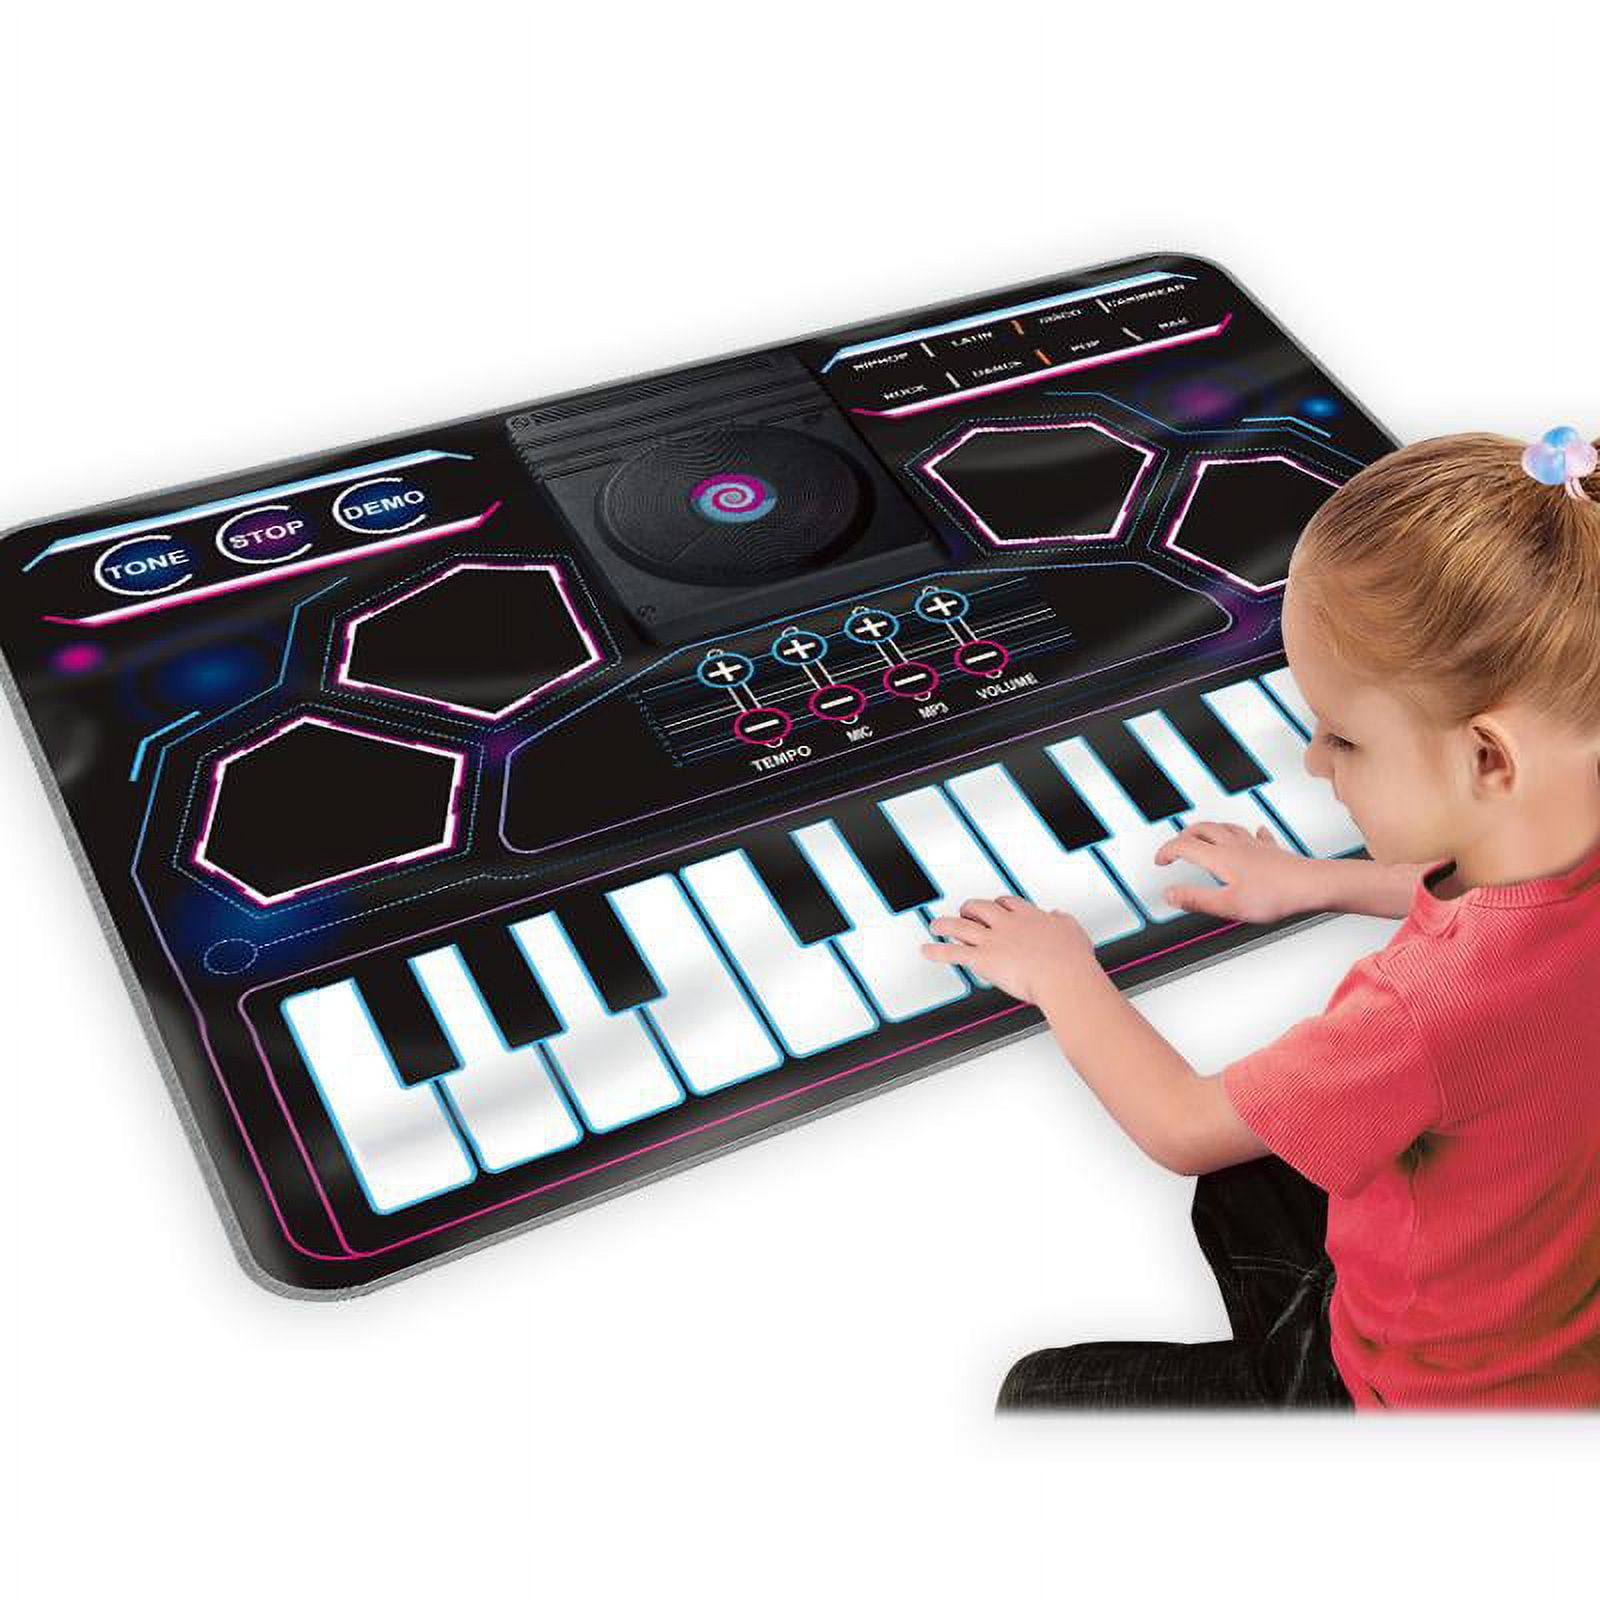 SUNLIN Mini DJ Mixer Playmat, Gift Toy for 3-8 Year Old Boys Girls,  Combined with Piano Mat & Drum Pad Beat Maker, Remix Sound, 8 Drum Sounds,  8 Instrument Sounds, 8 Music